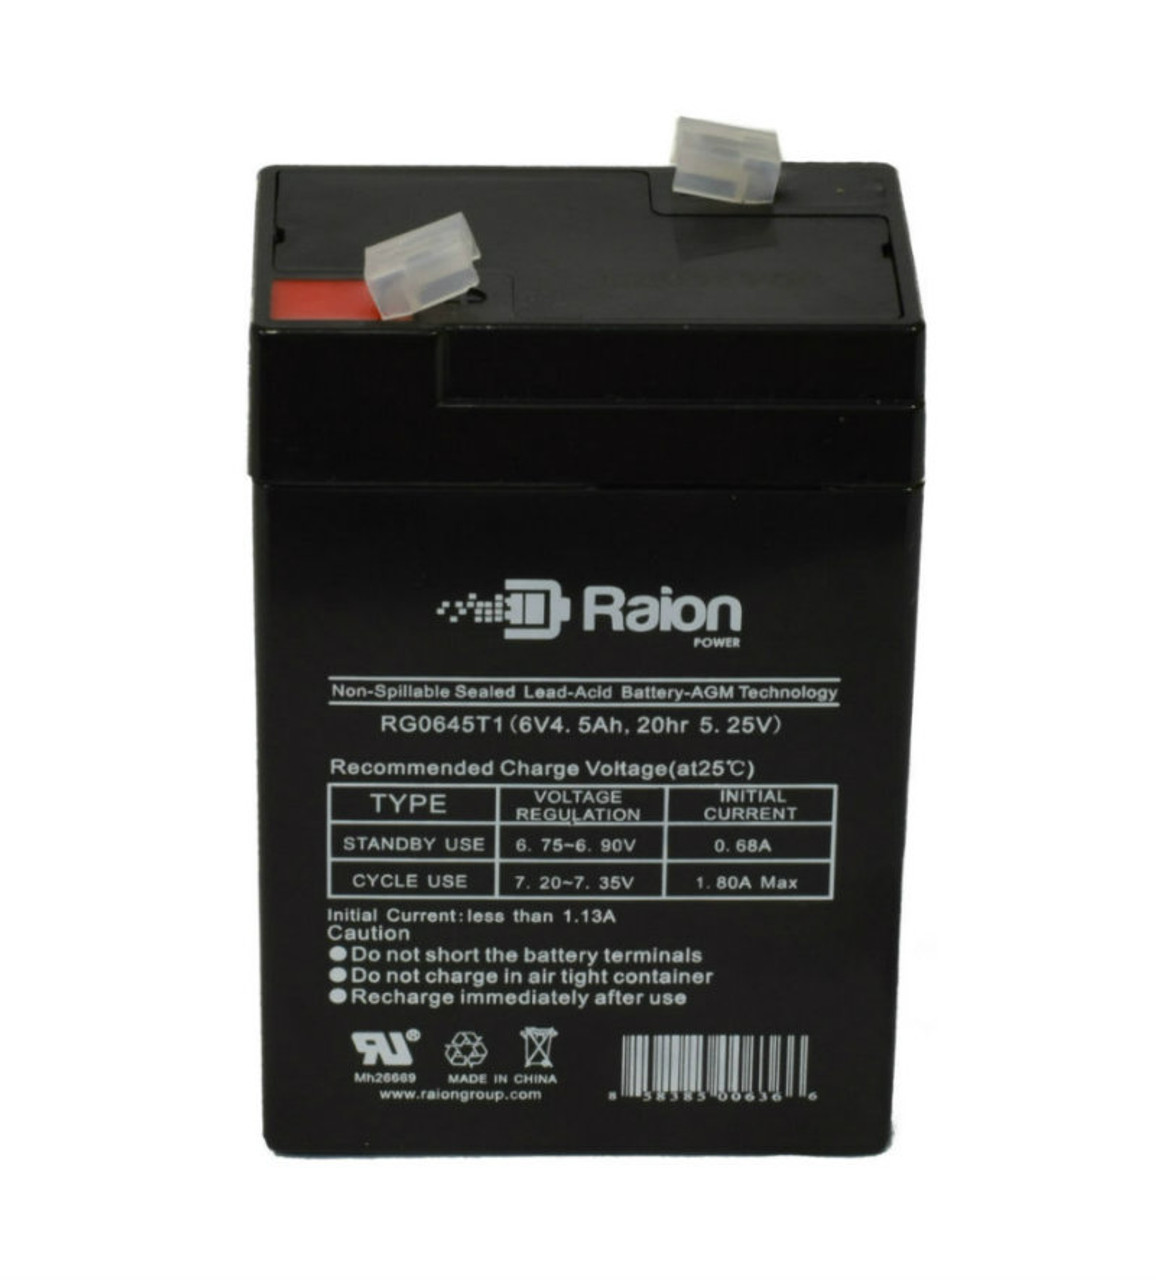 Raion Power RG0645T1 Replacement Battery Cartridge for BCI Inc 6200 Patient Monitor